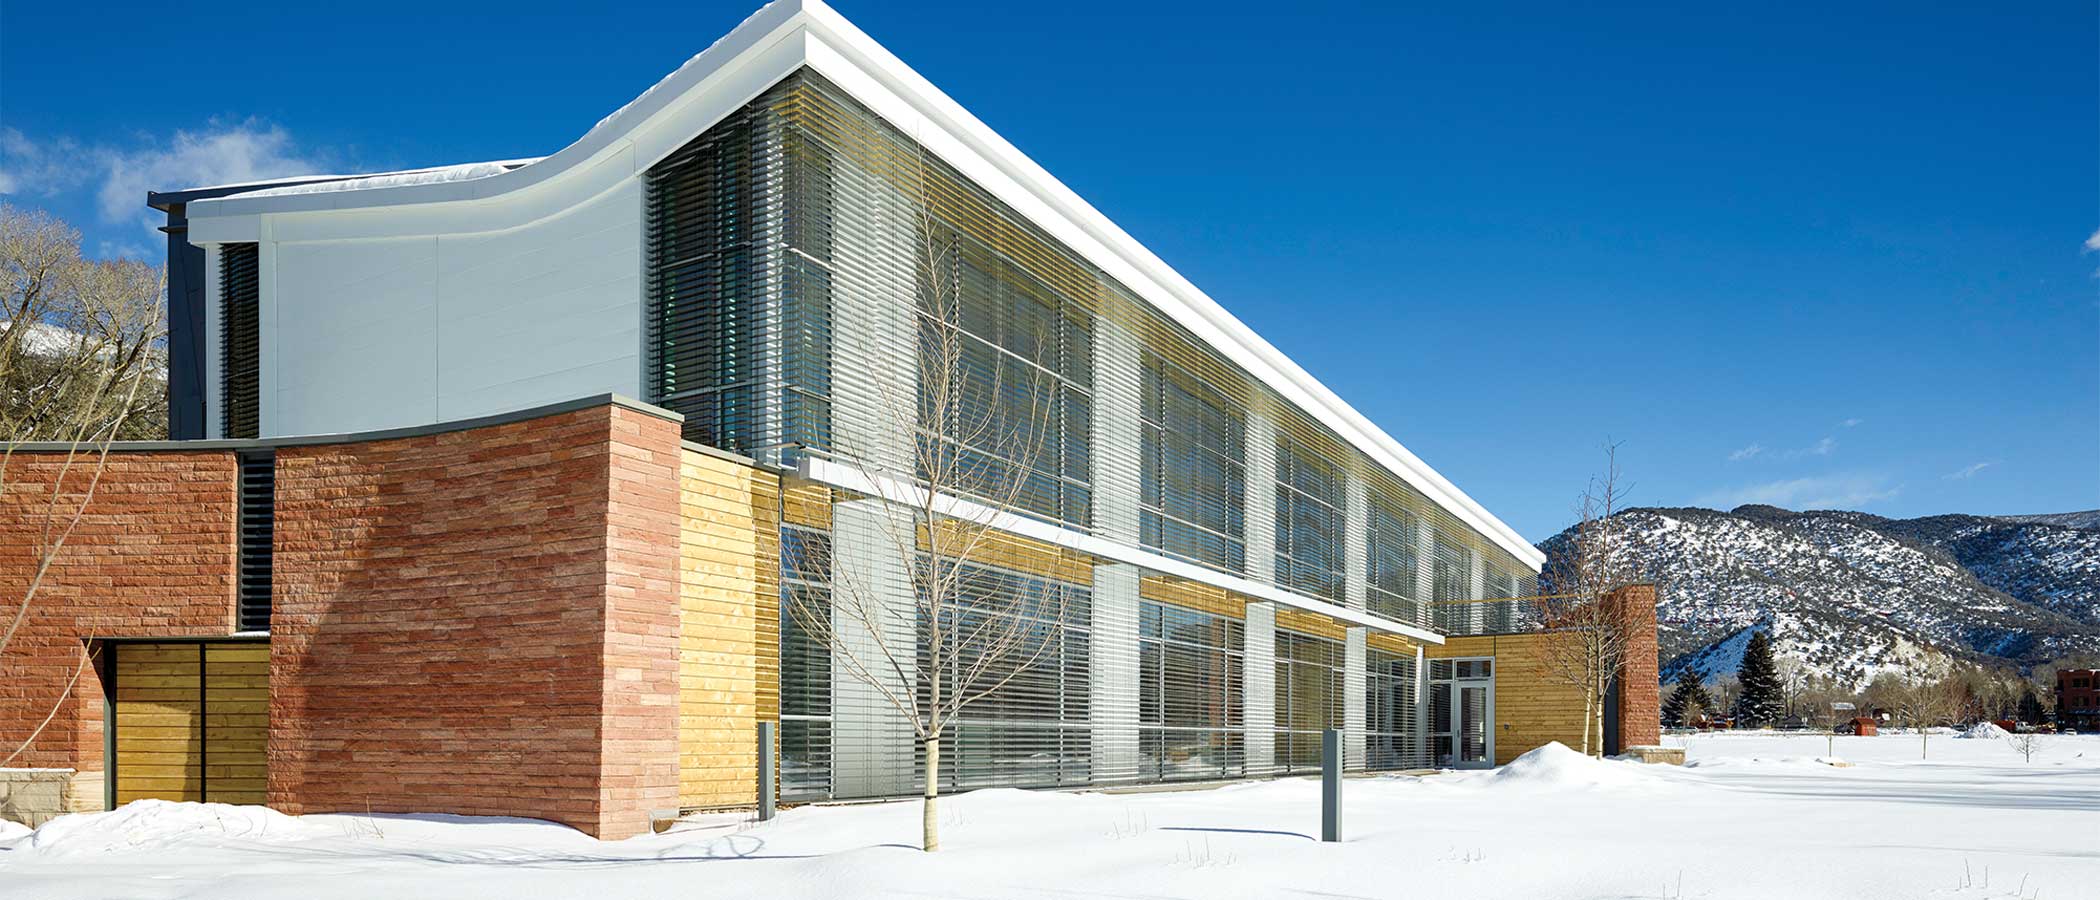 Exterior of Rocky mountain Institute building during winter.